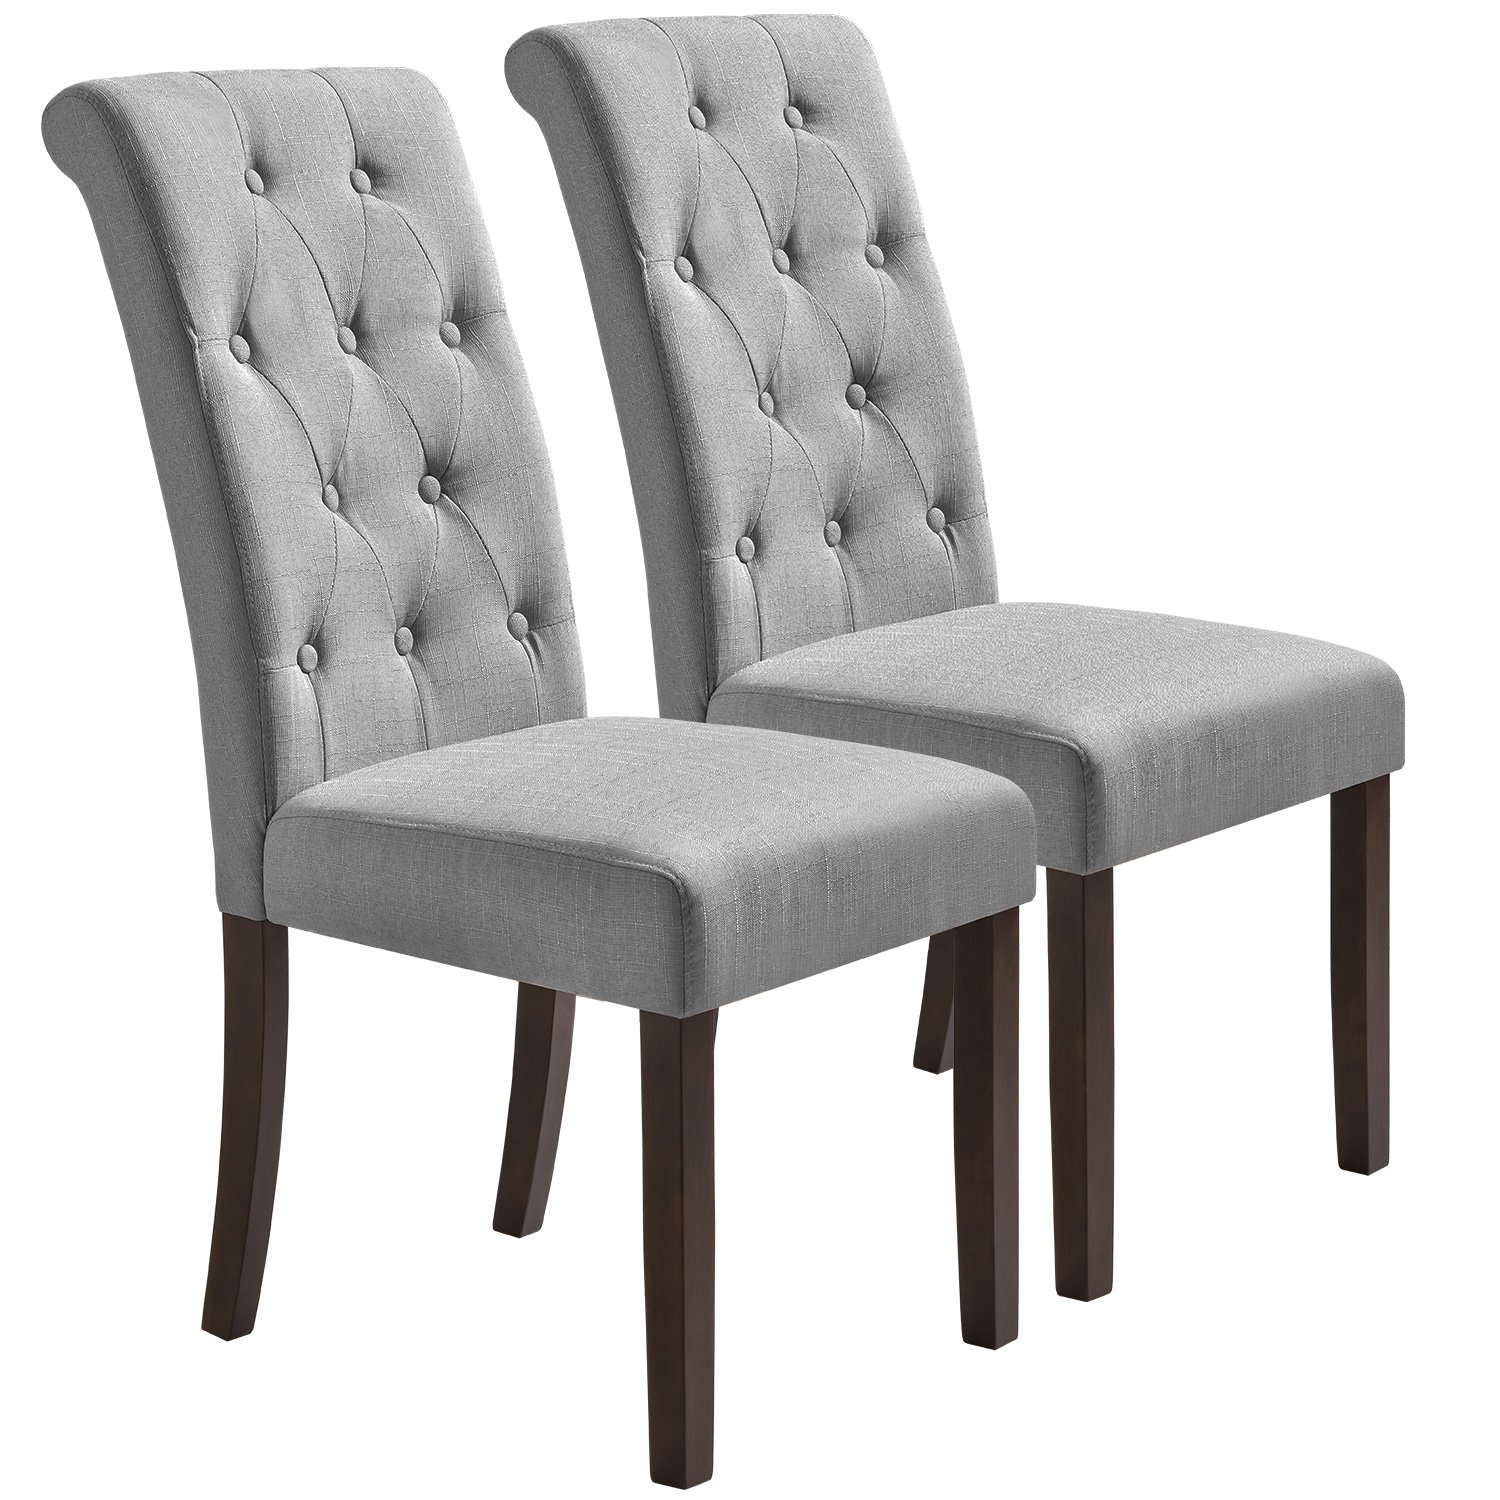 Aristocratic Style Dining Chair Noble And Elegant Solid Wood Tufted Dining Chair Set Of 2 - WF034953EAA